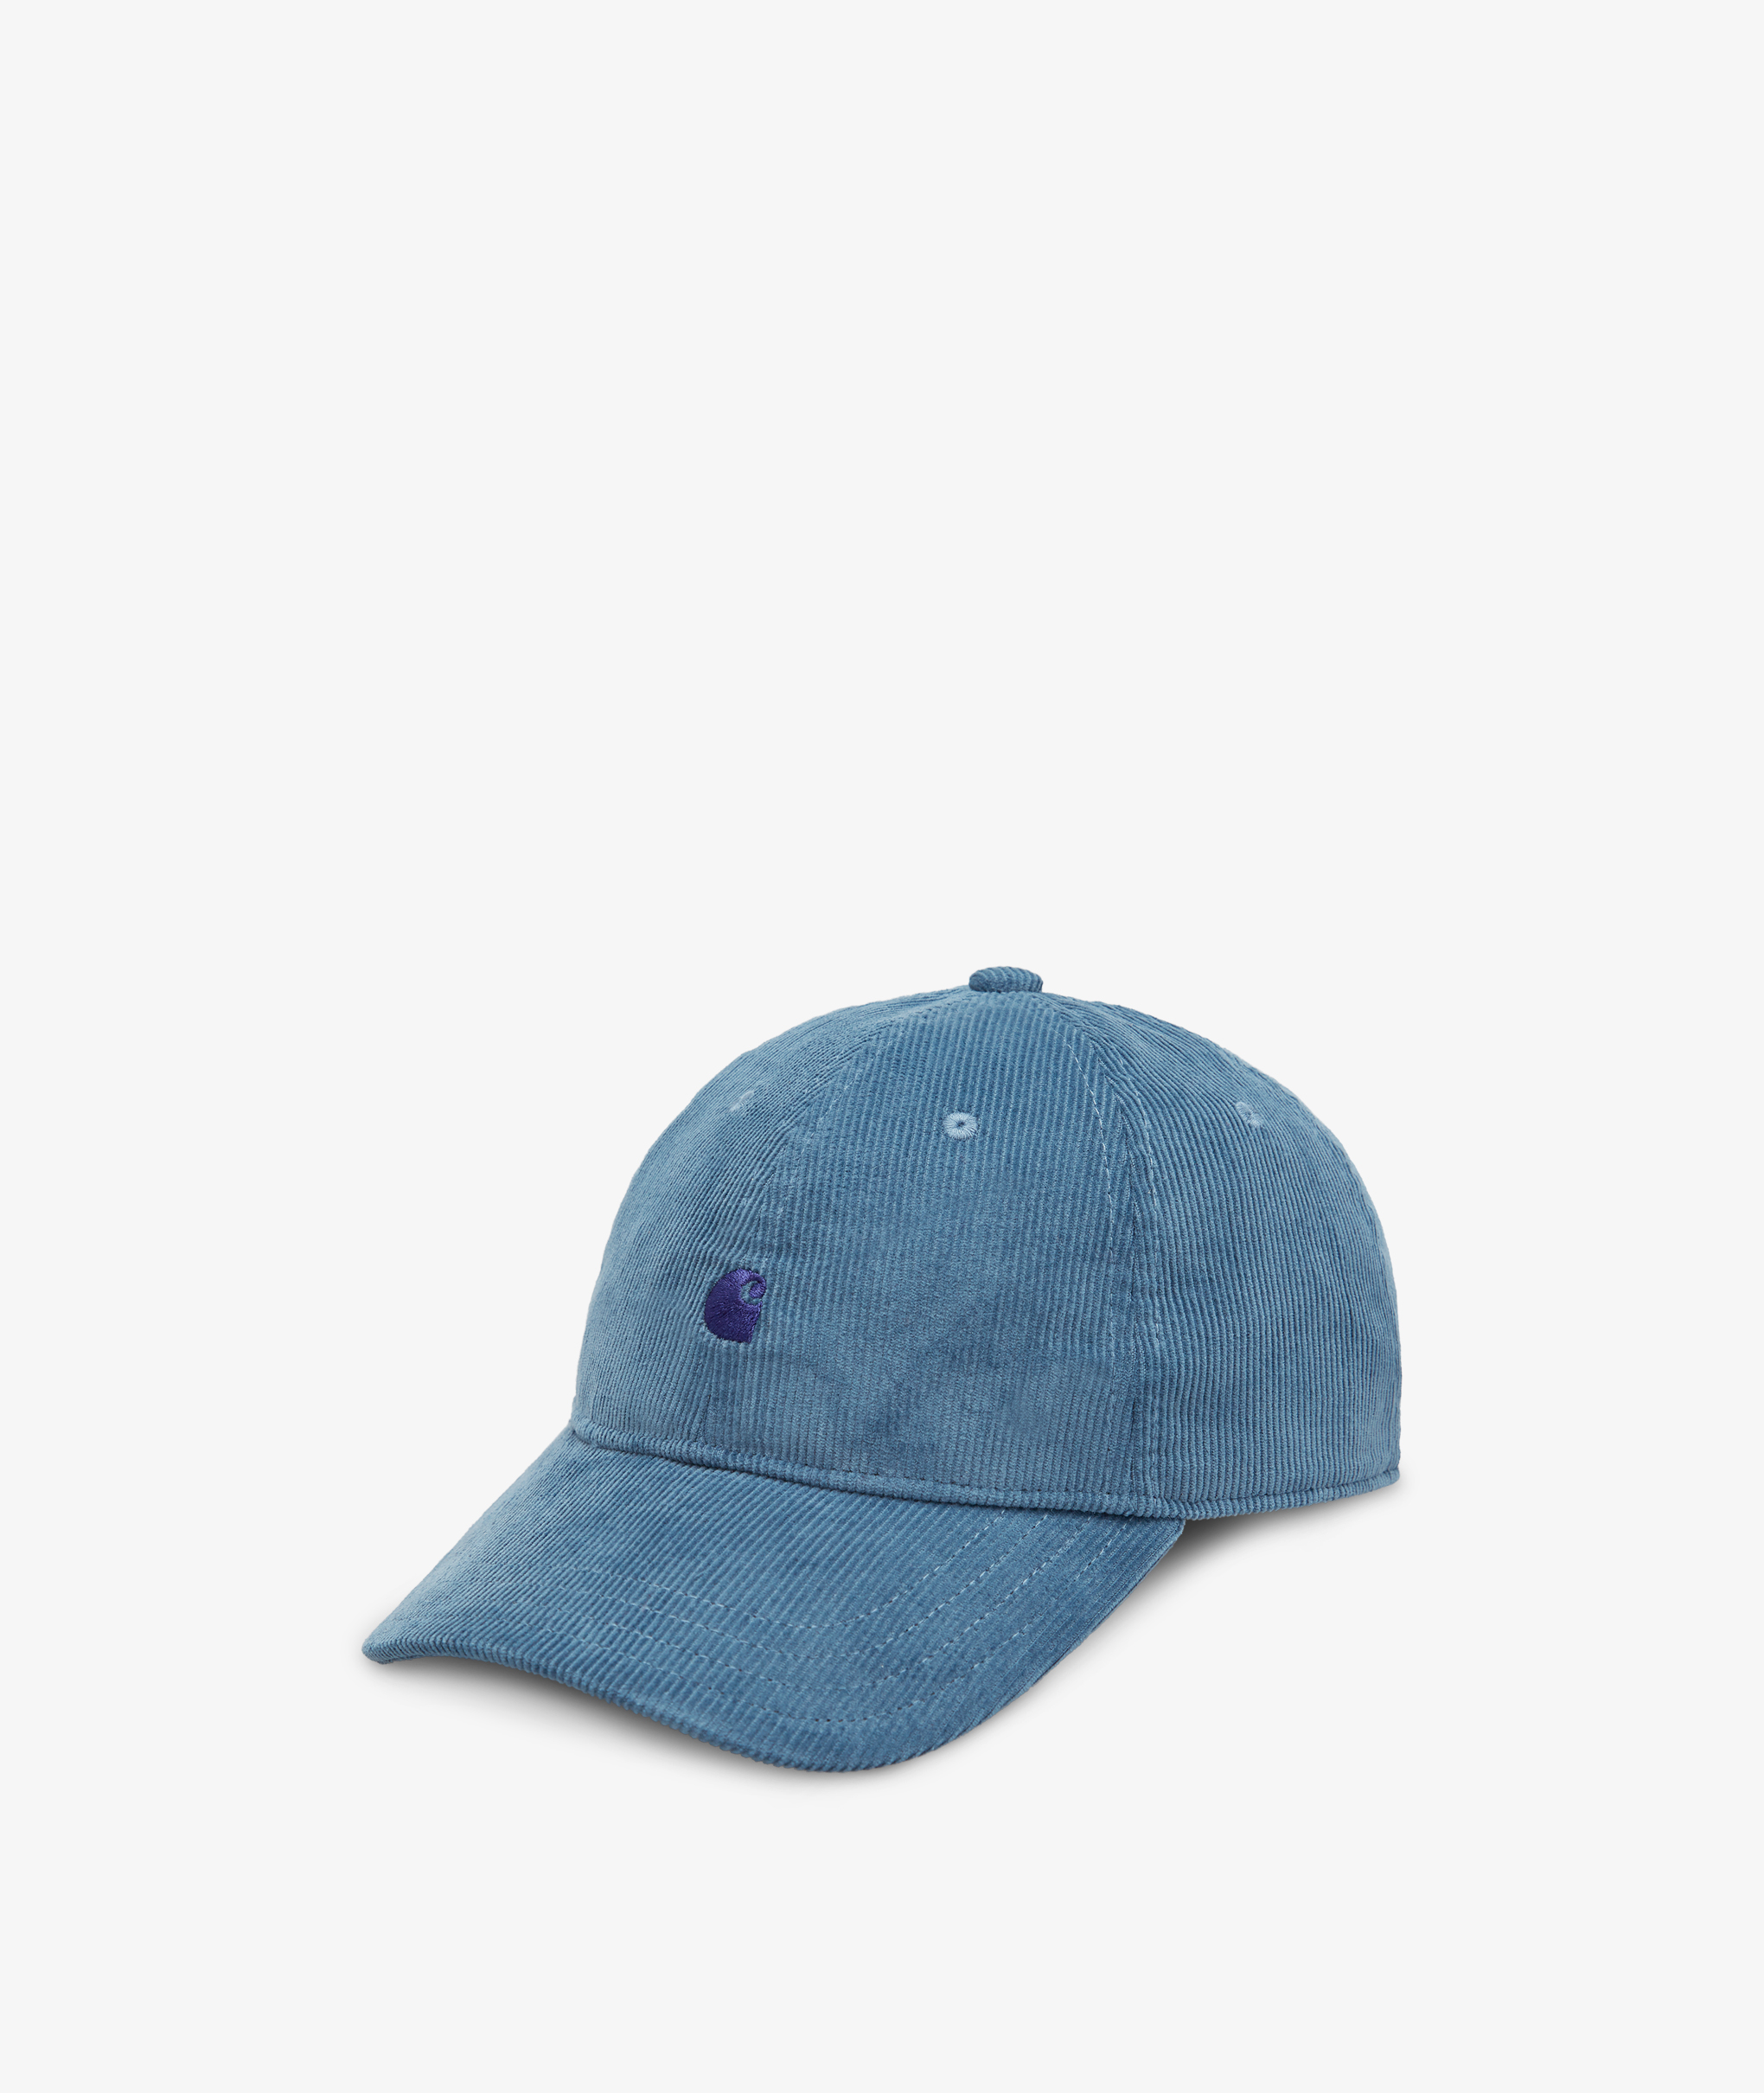 Norse Store | Shipping Worldwide - Carhartt Harlem Cap - Icy Water